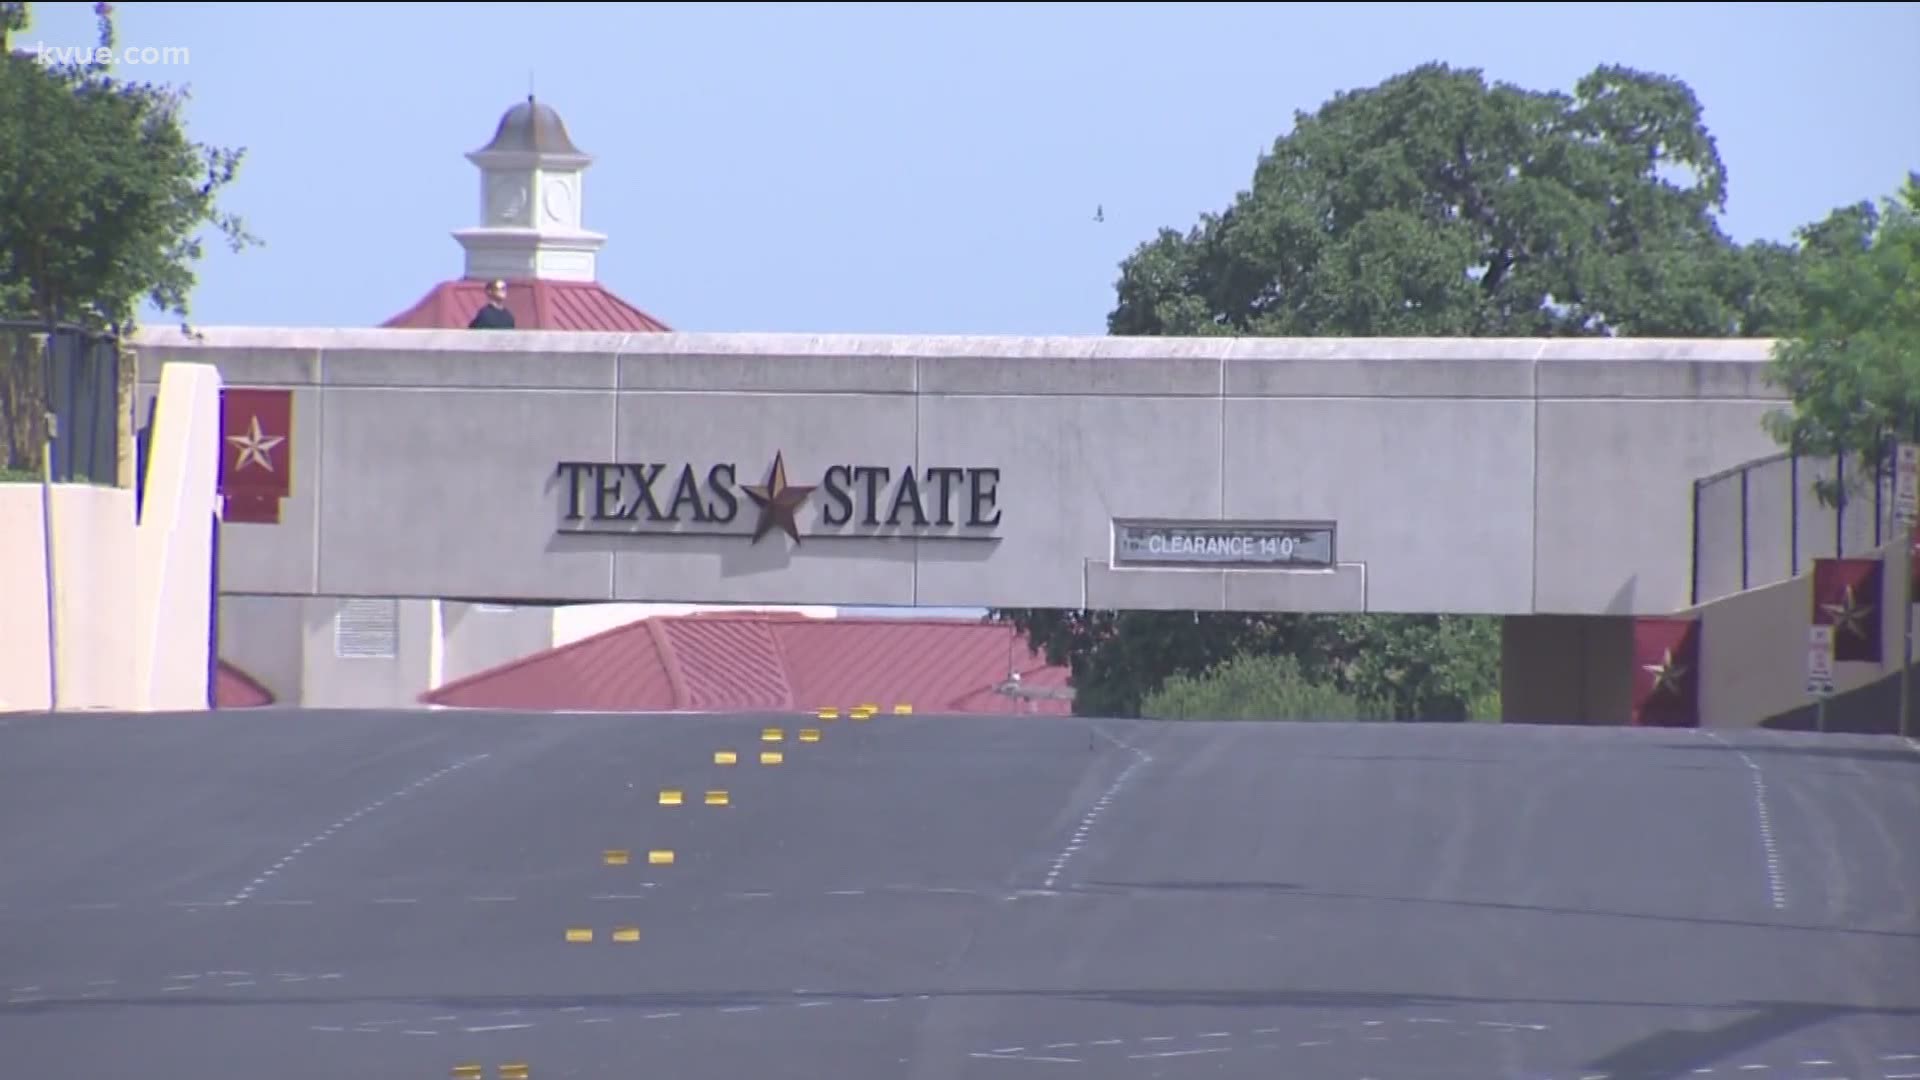 Some want to know if students who tested positive for COVID-19 are being kept in Texas State dorms.